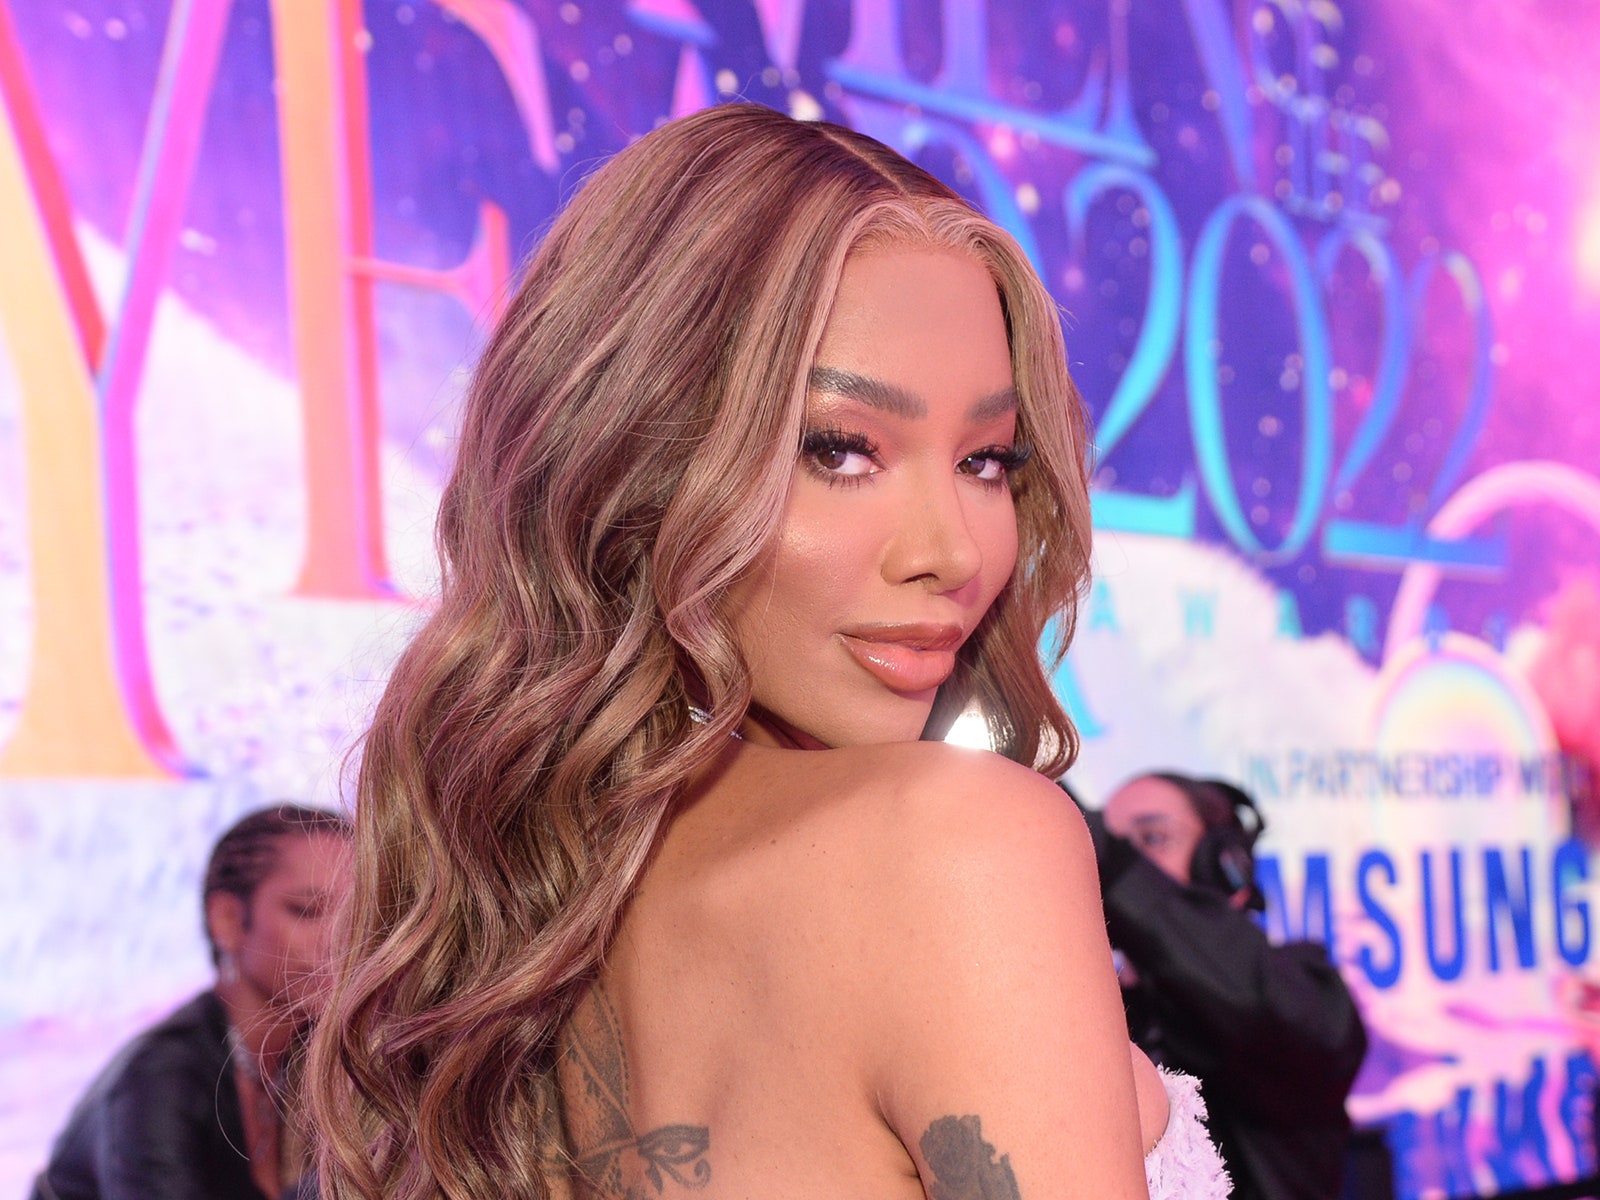 Munroe Bergdorf: The beauty industry is more inclusive than ever, but there’s still *so* much we need to change